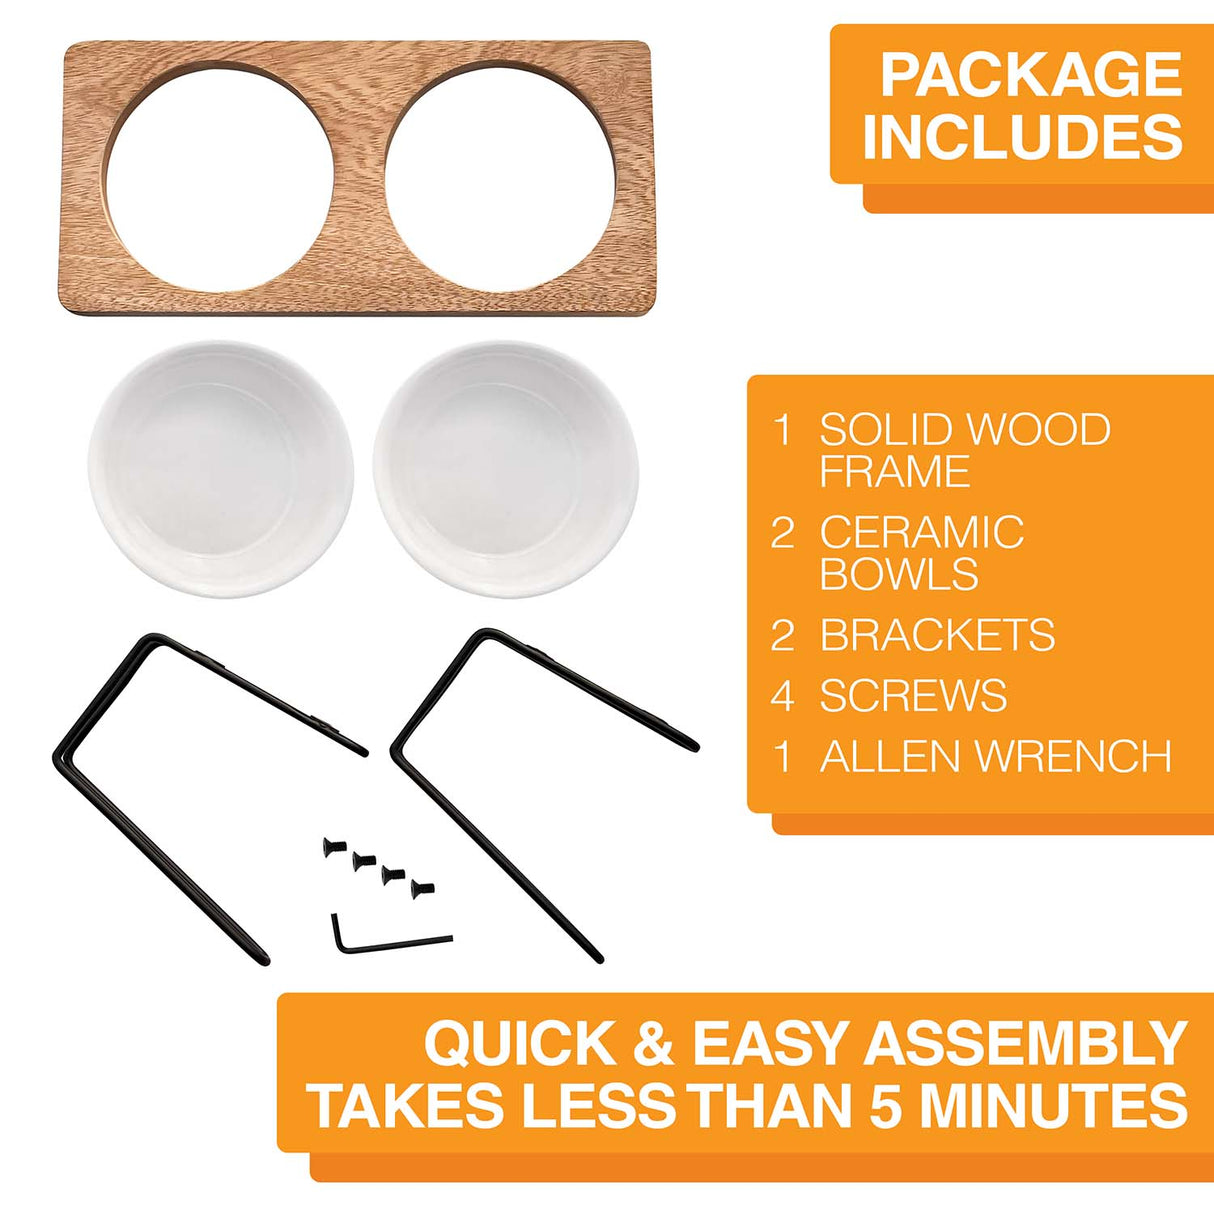 images showing contents of box: 1 frame, 2 ceramic bowls, 2 brackets, 4 screws, and 1 allen wrench